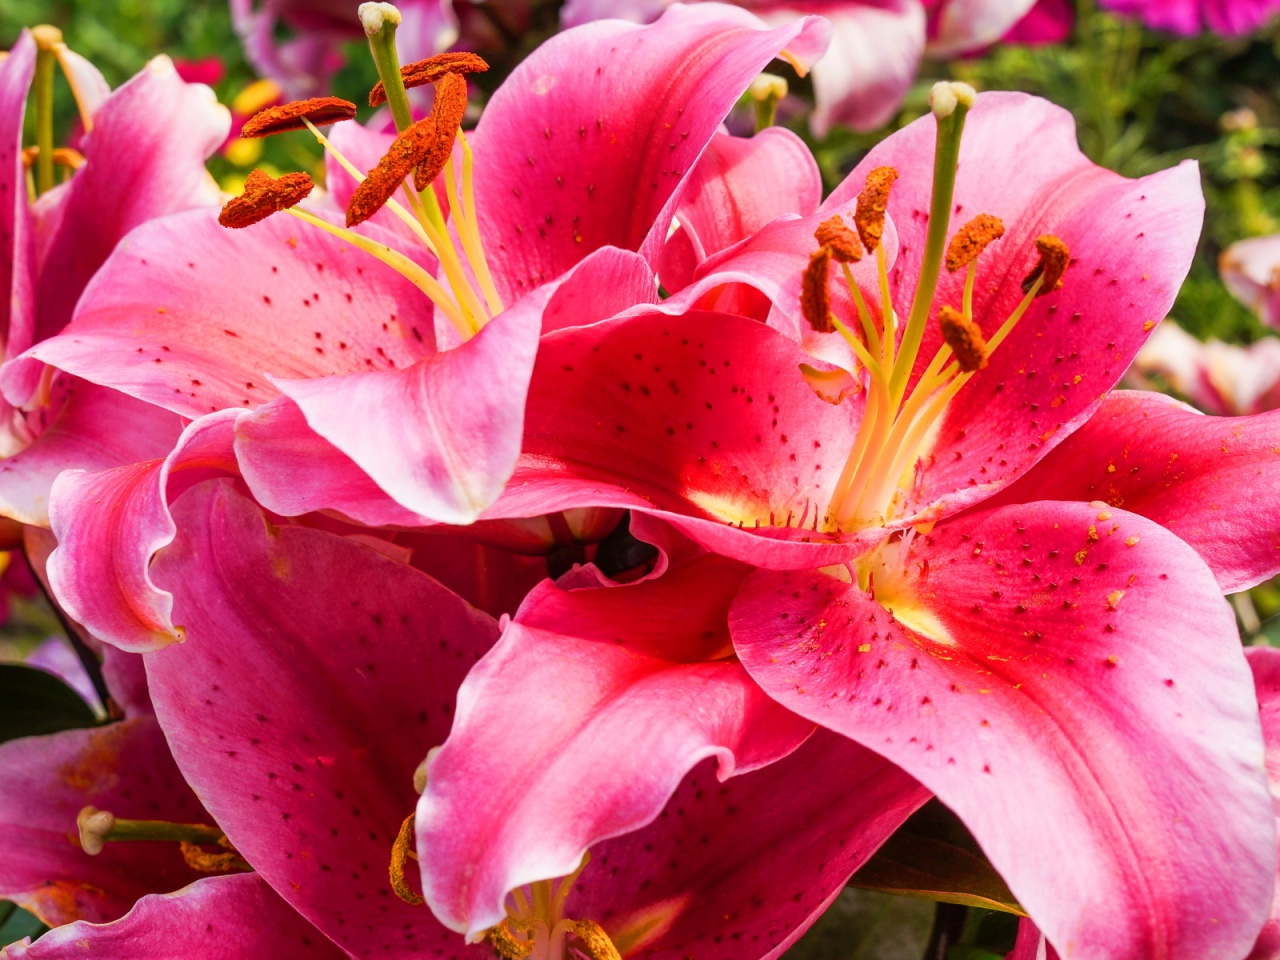 Gallery For Gt Pink Stargazer Lily Wallpaper